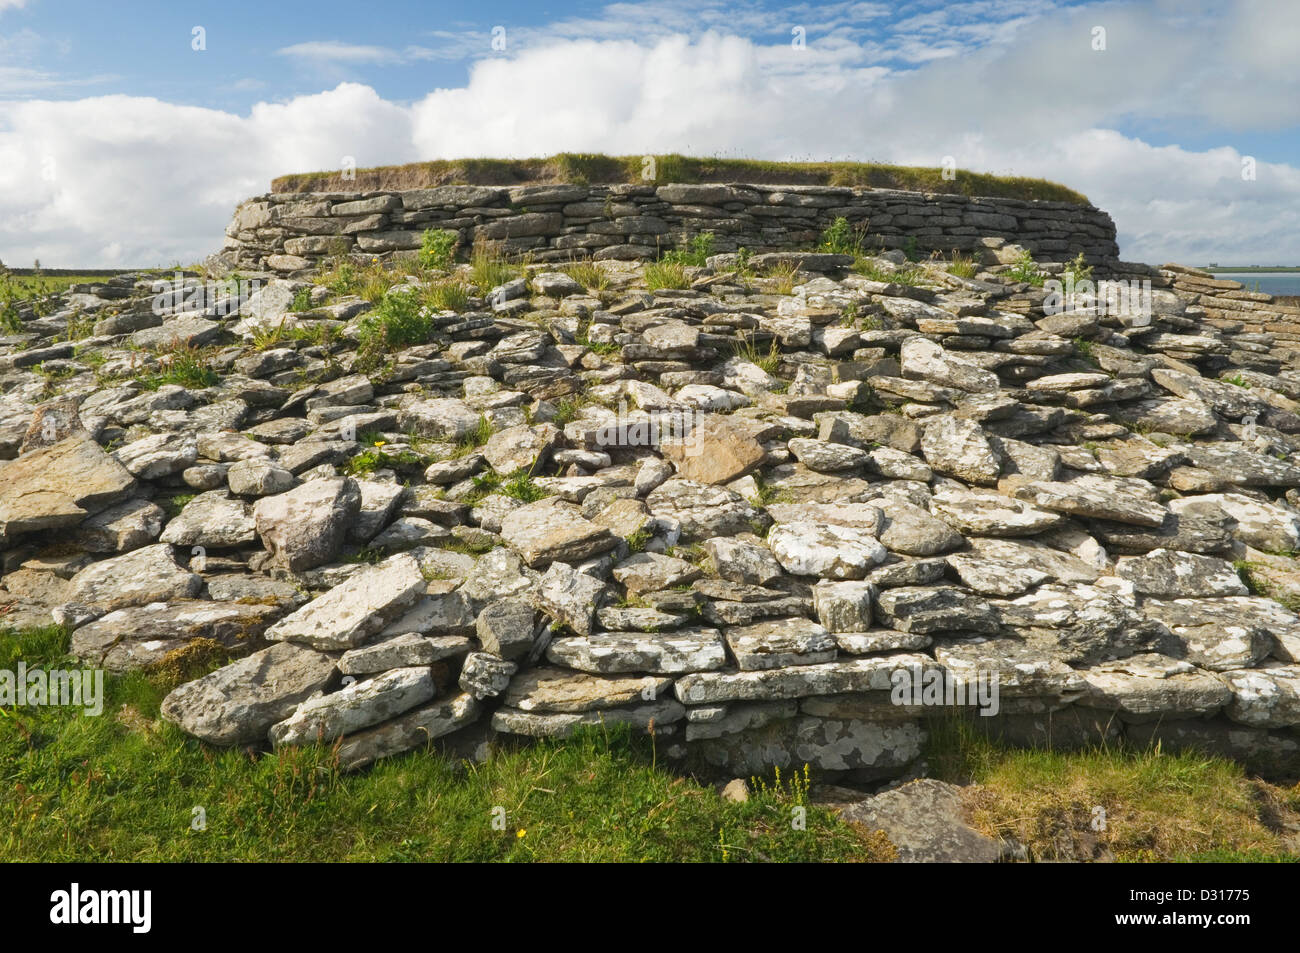 Quoyness chambered cairn on the island of Sanday, Orkney Islands, Scotland. Stock Photo